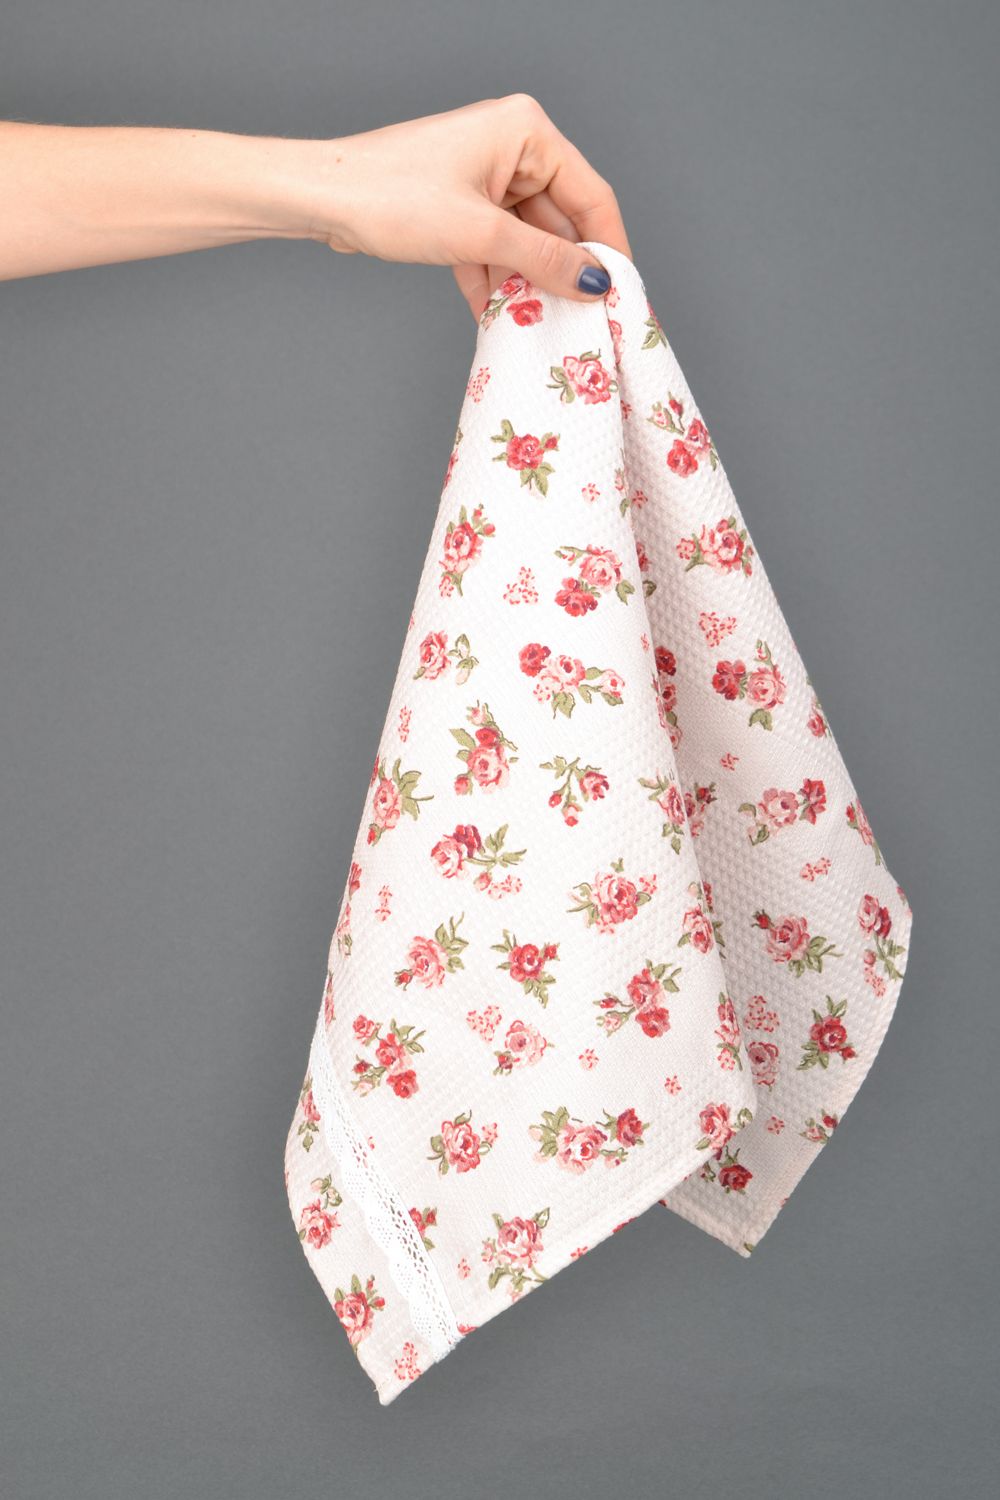 Handmade fabric kitchen towel with roses photo 1